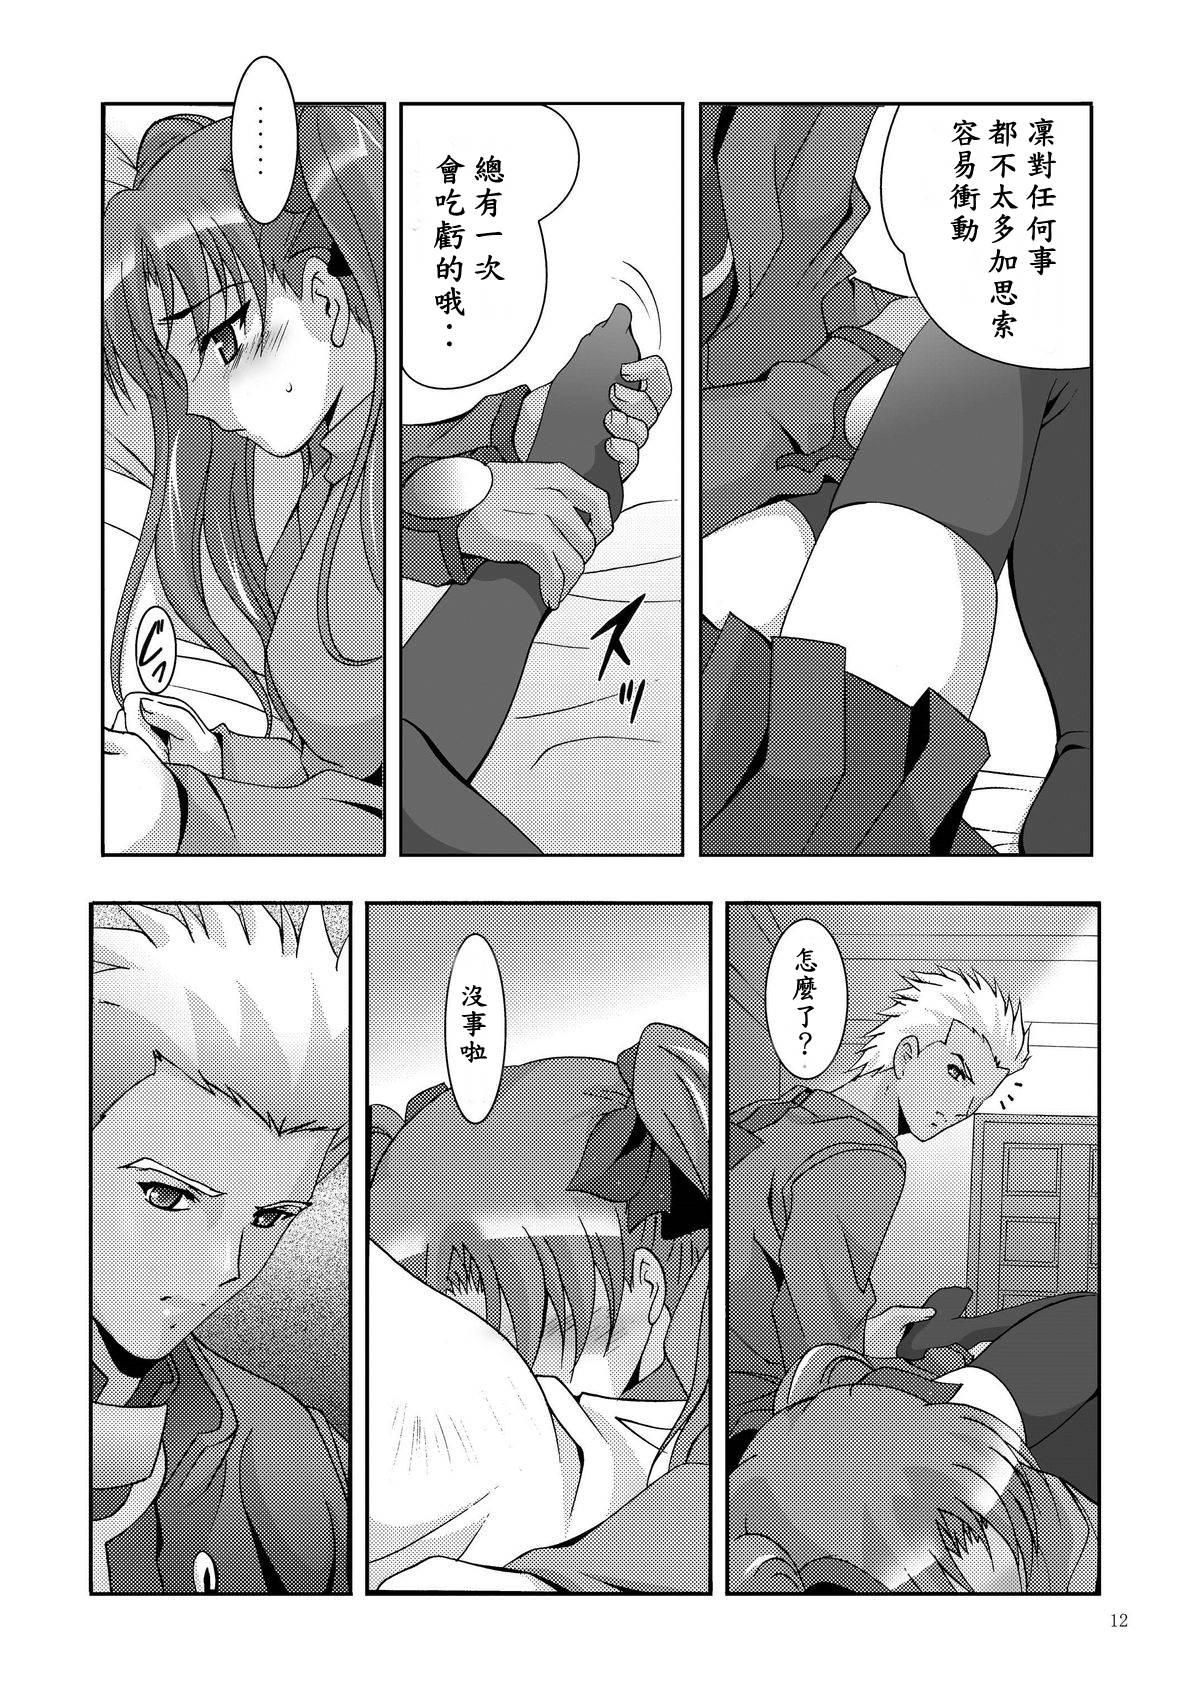 Orgasms MOUSOU THEATER 19 - Fate stay night Hot Naked Girl - Page 10